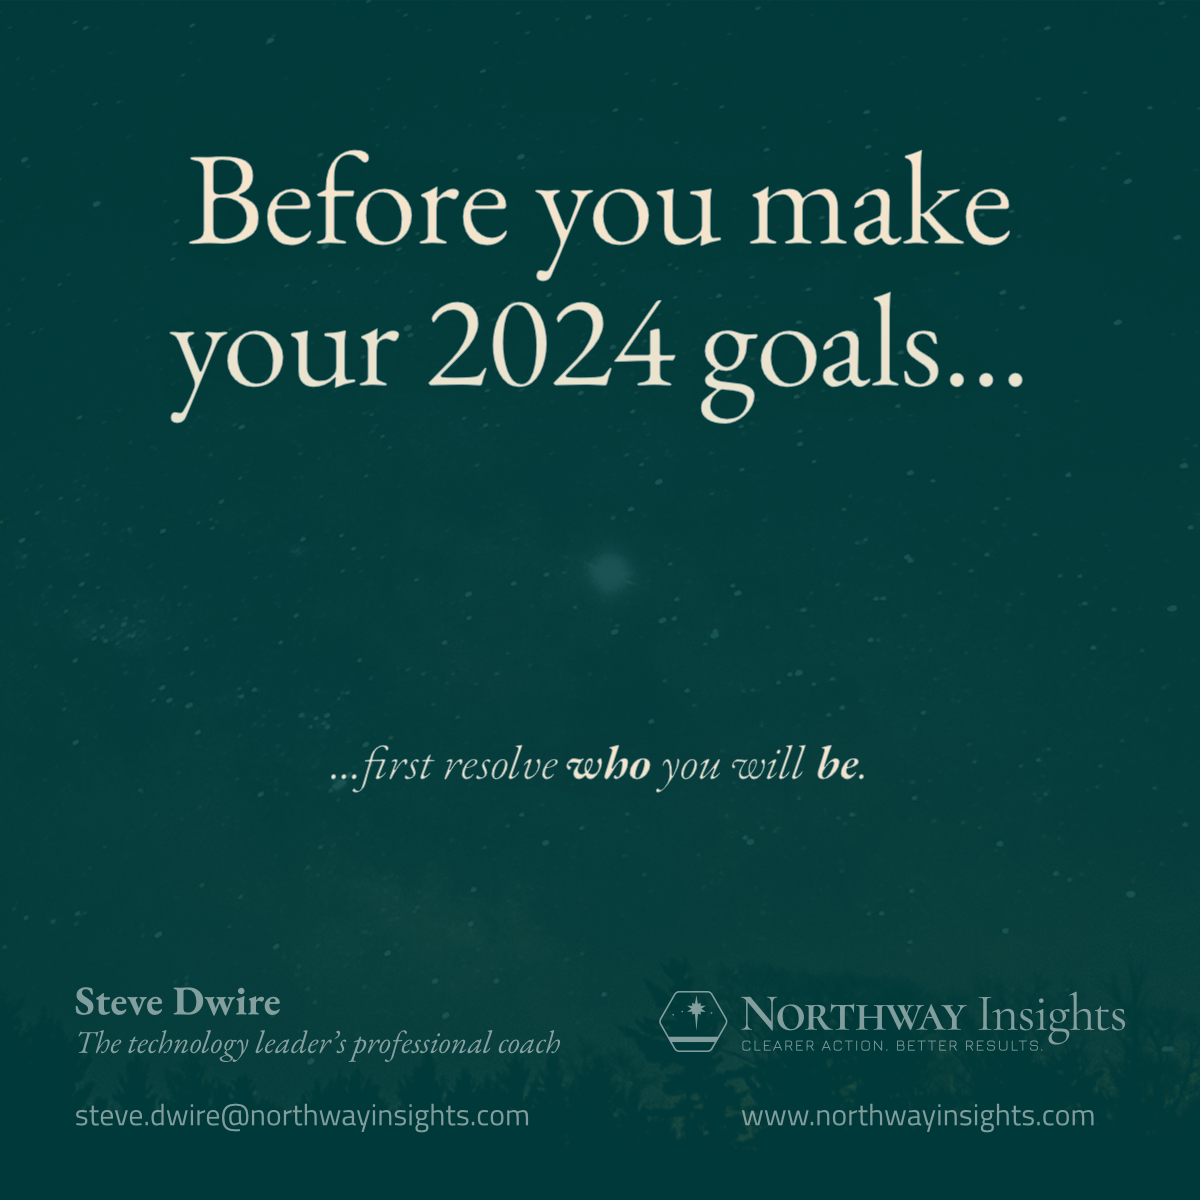 Before you make your 2024 goals, first resolve who you will be.